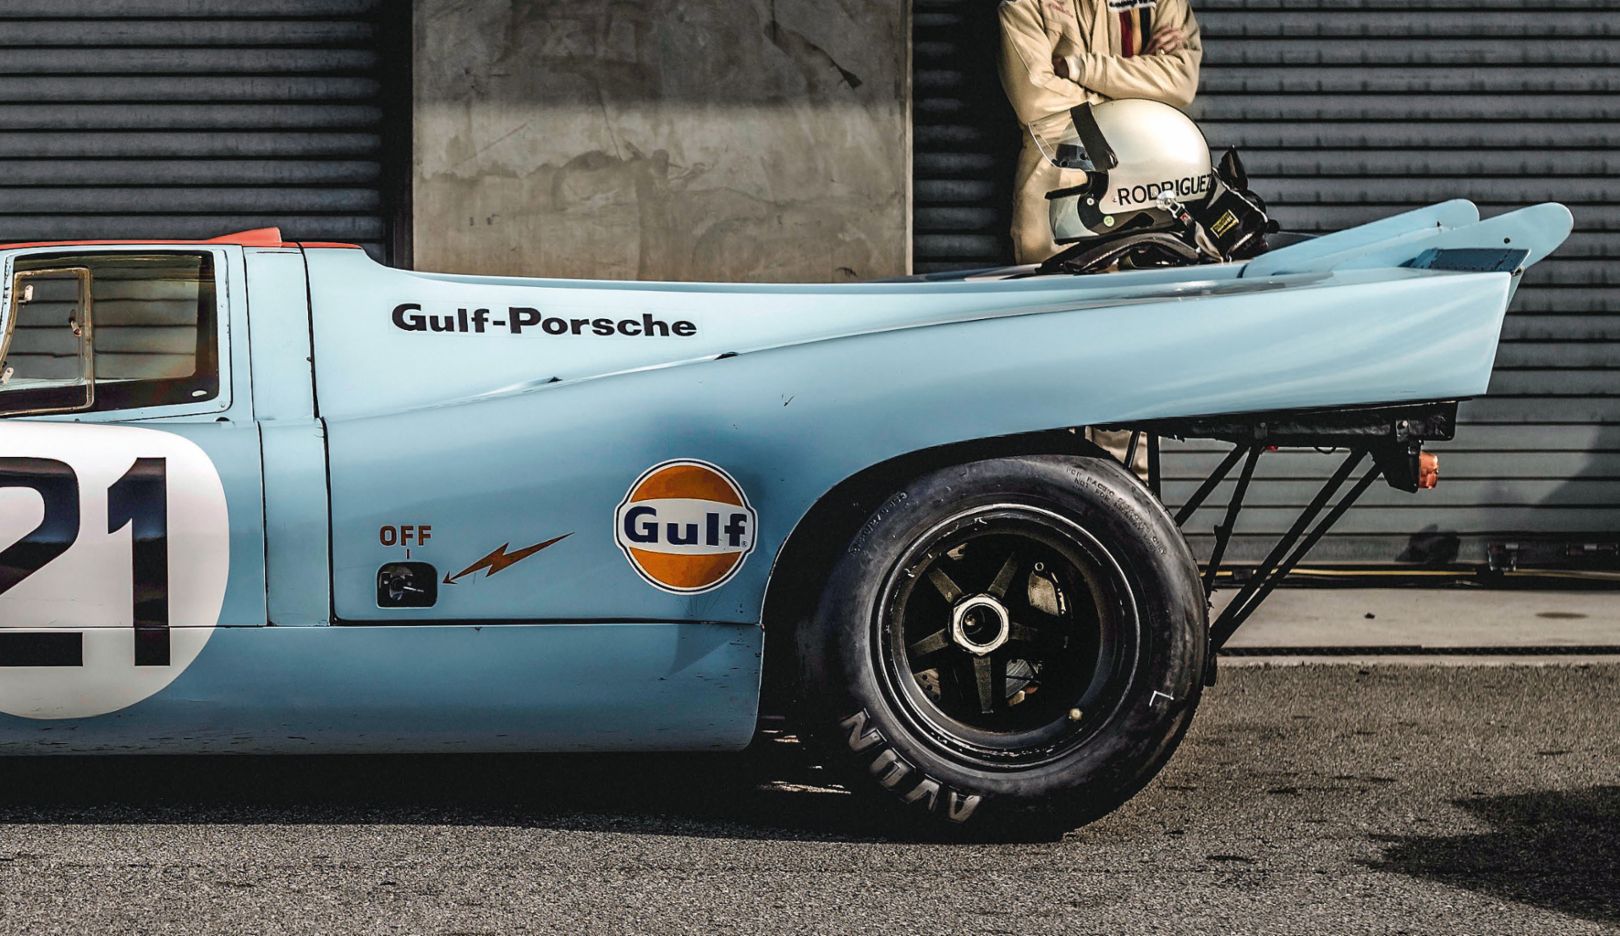 Composed: One of his favorite pictures—a Porsche 917 that Lotterer photographed at the Rennsport Reunion in California. “Everything came together: light, background, mood.”